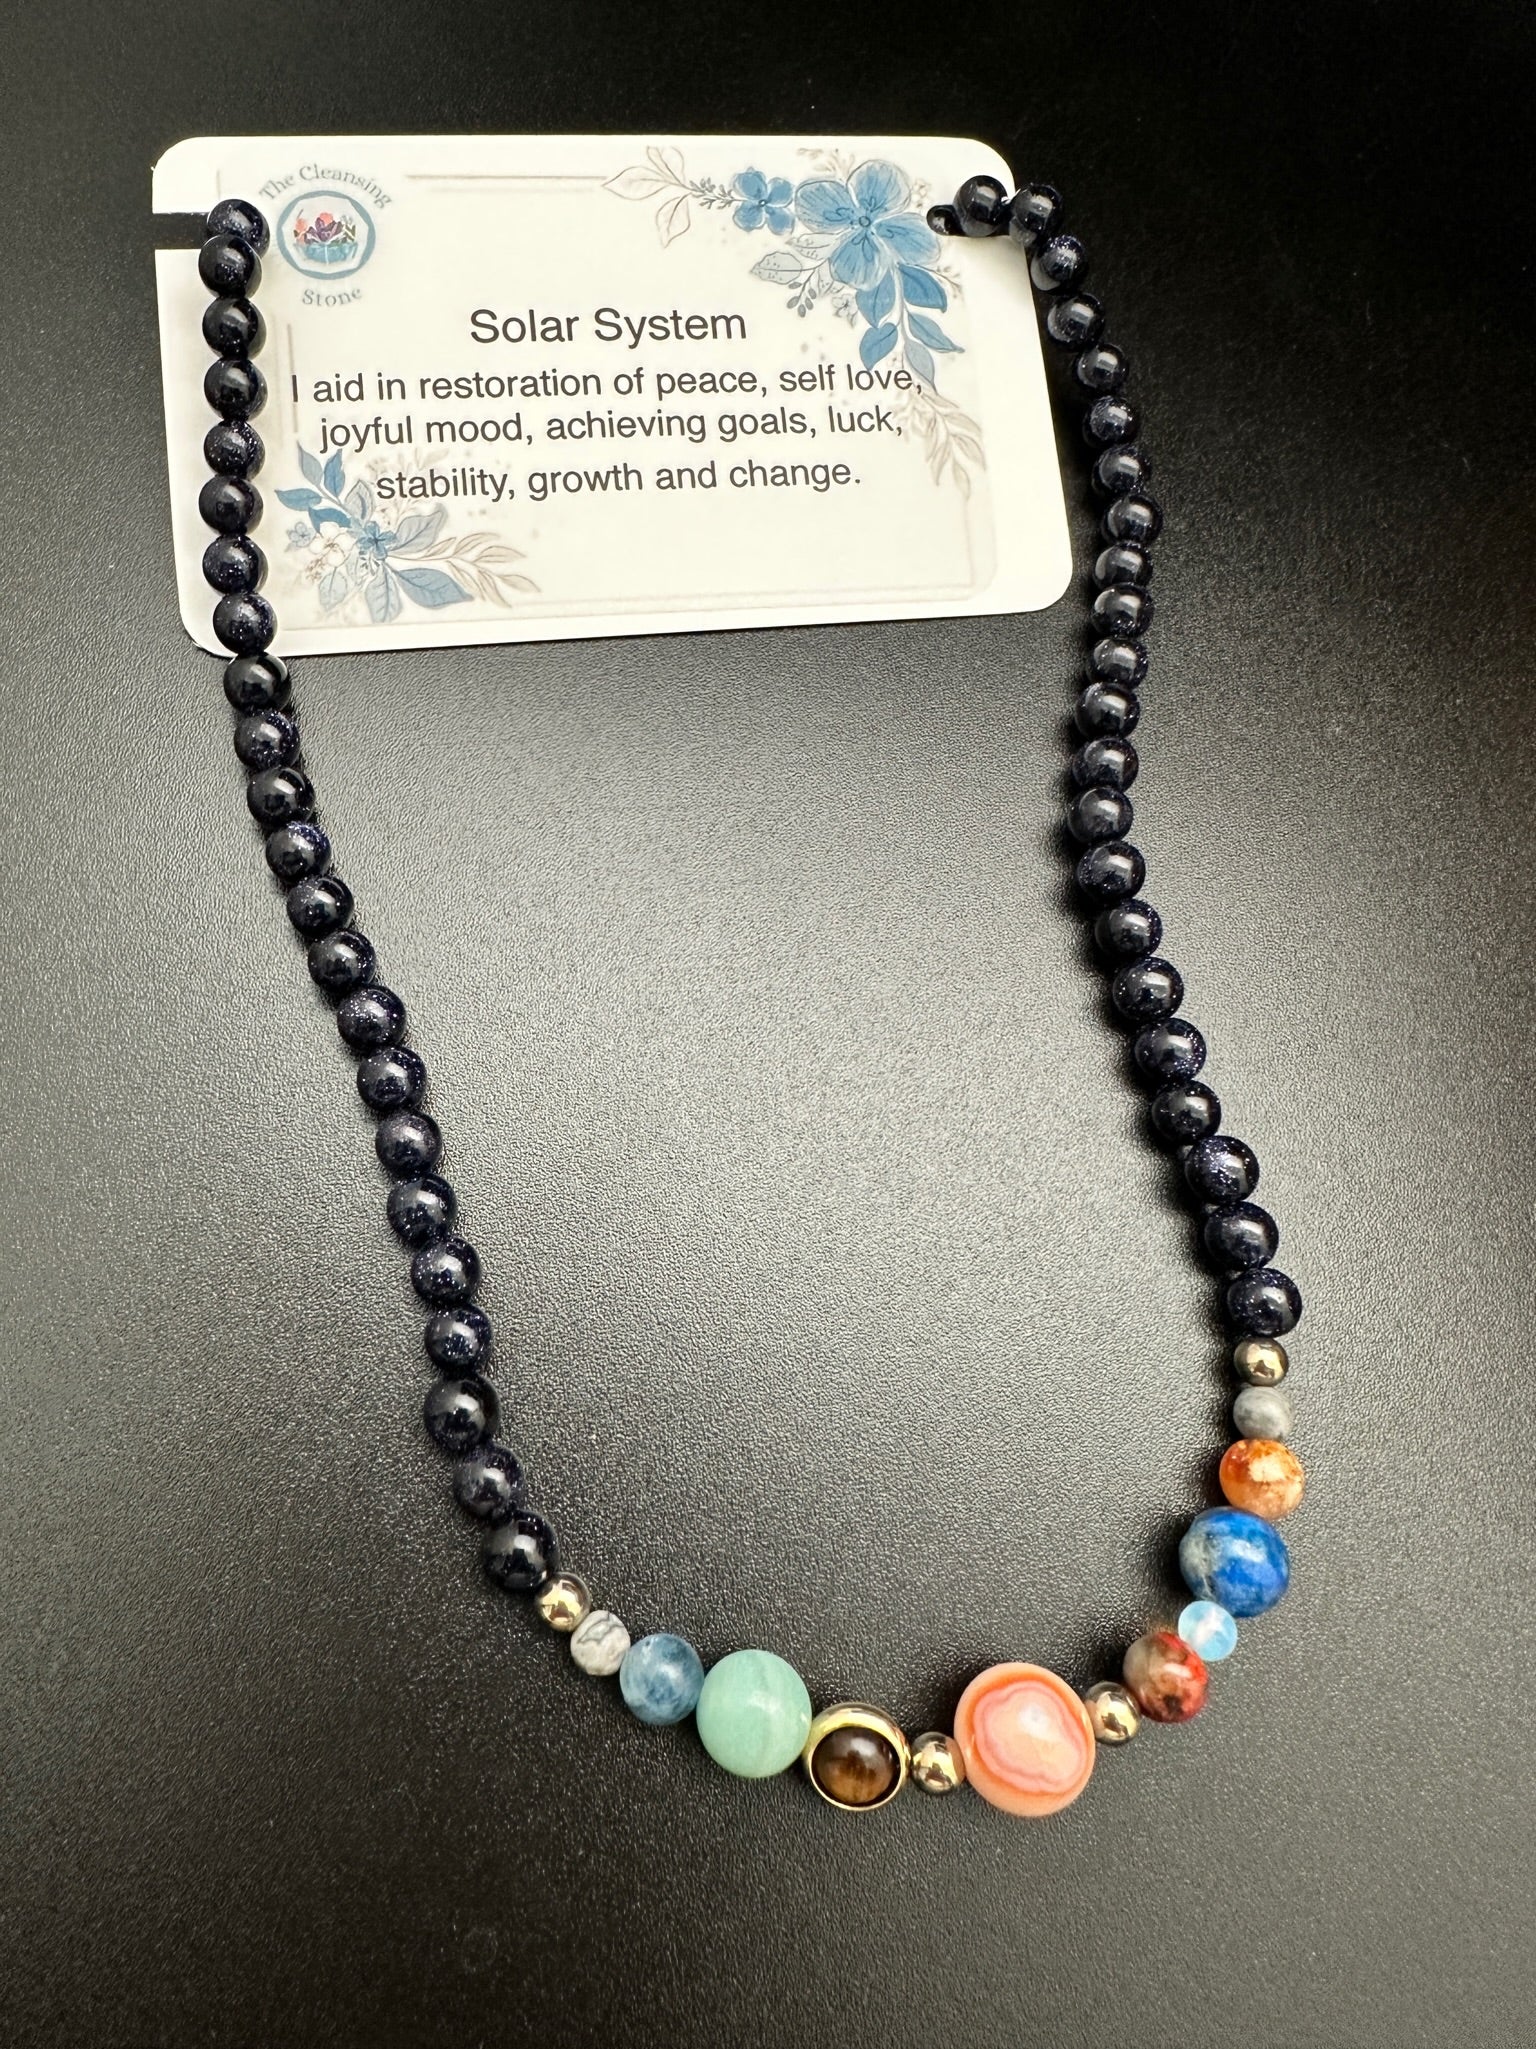 Solar System Necklace with 48 Clear crystals - Universal Power - Controse